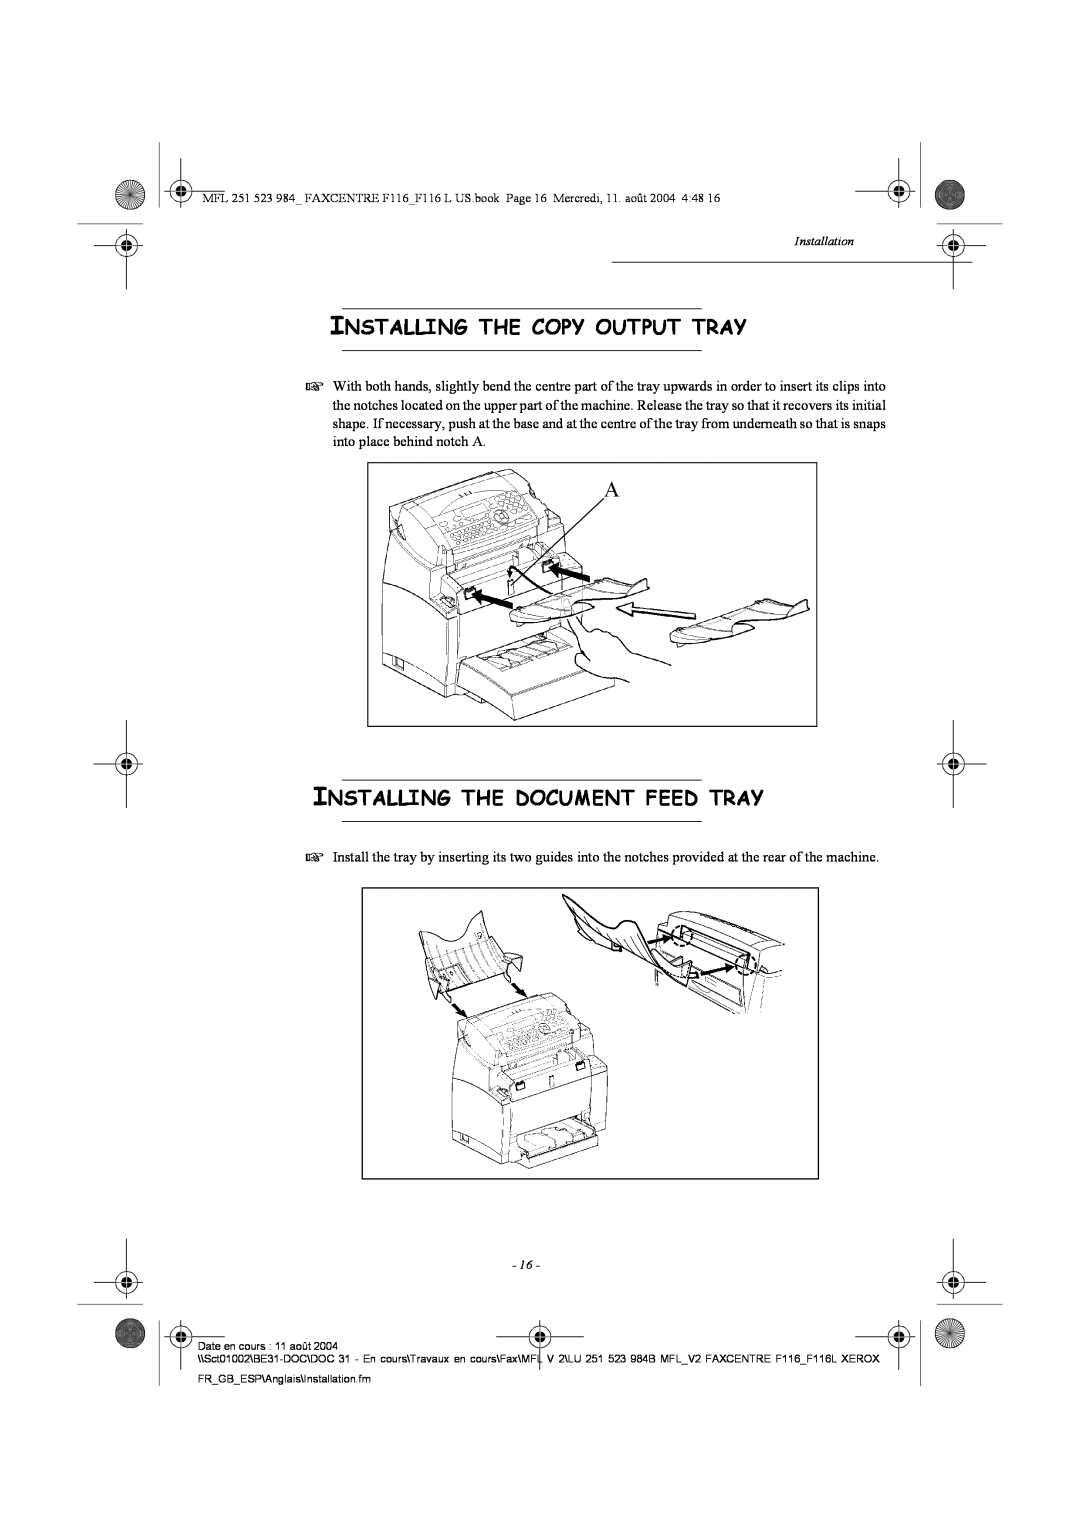 Xerox F116 user manual Installing The Copy Output Tray, Installing The Document Feed Tray 